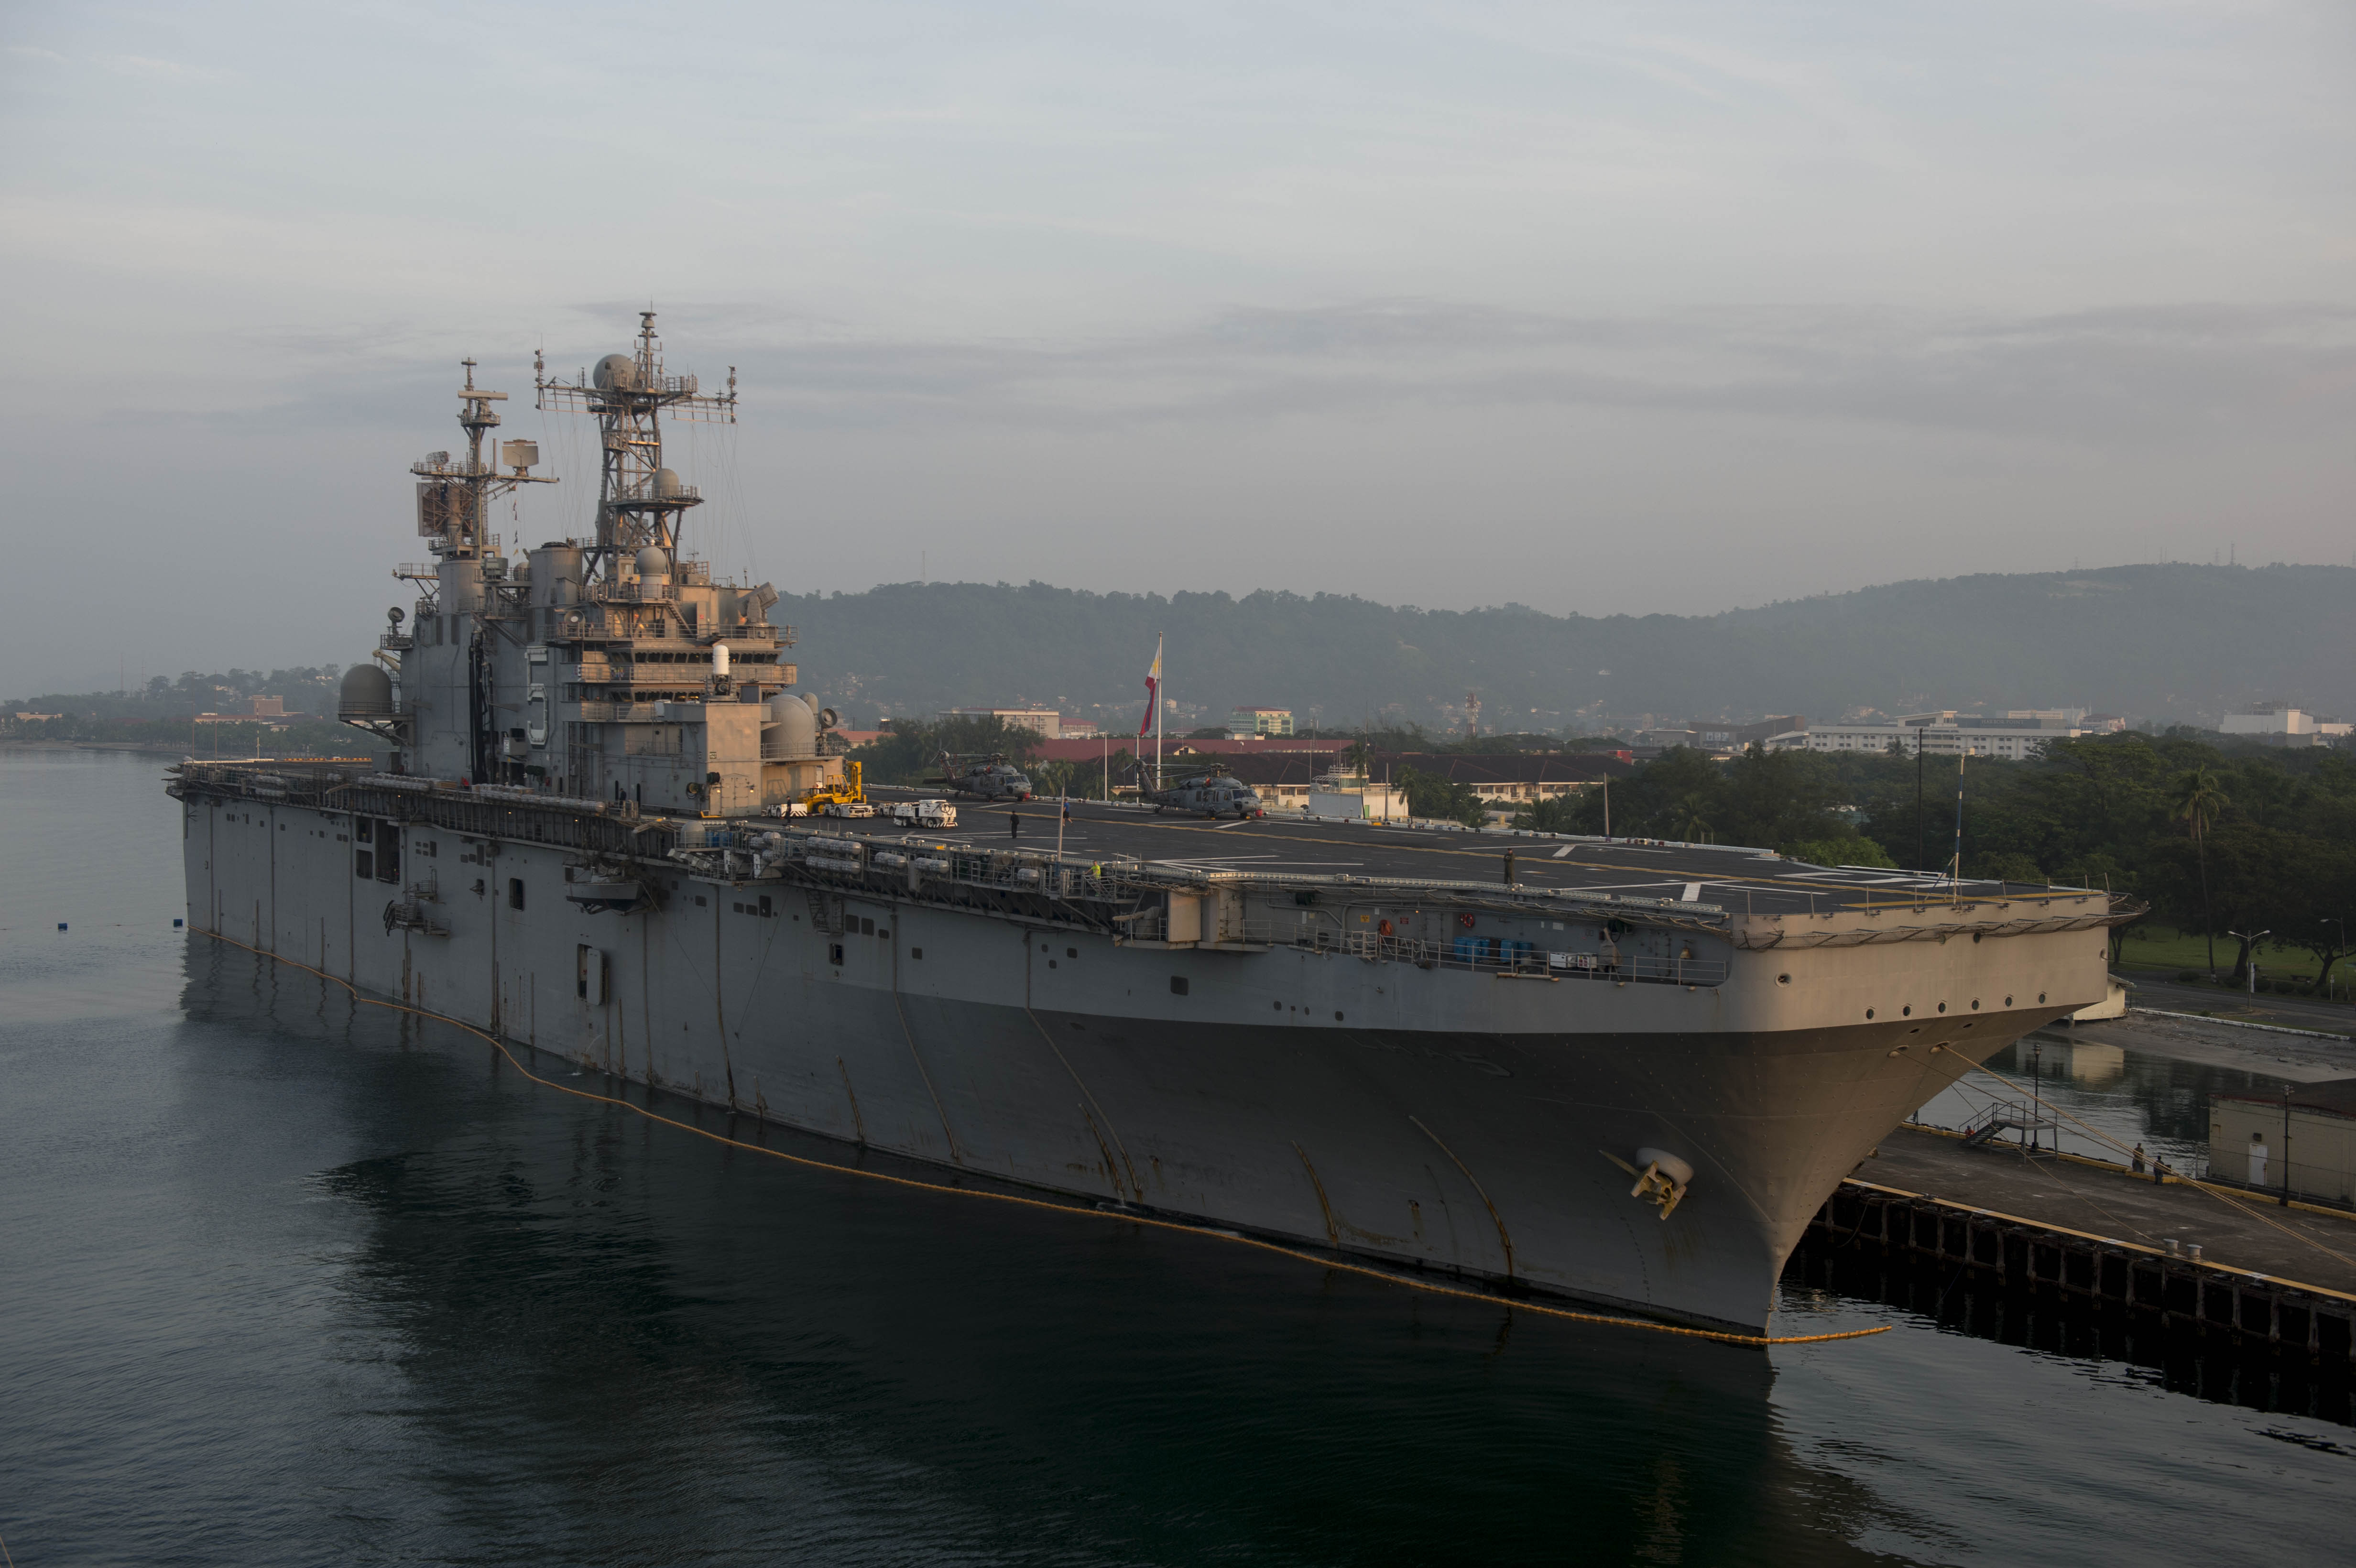 USS Peleliu (LHA-5) is moored at Subic Bay, Philippines, for Amphibious Landing Exercise 2015 on Sept. 30, 2014. US Navy Photo